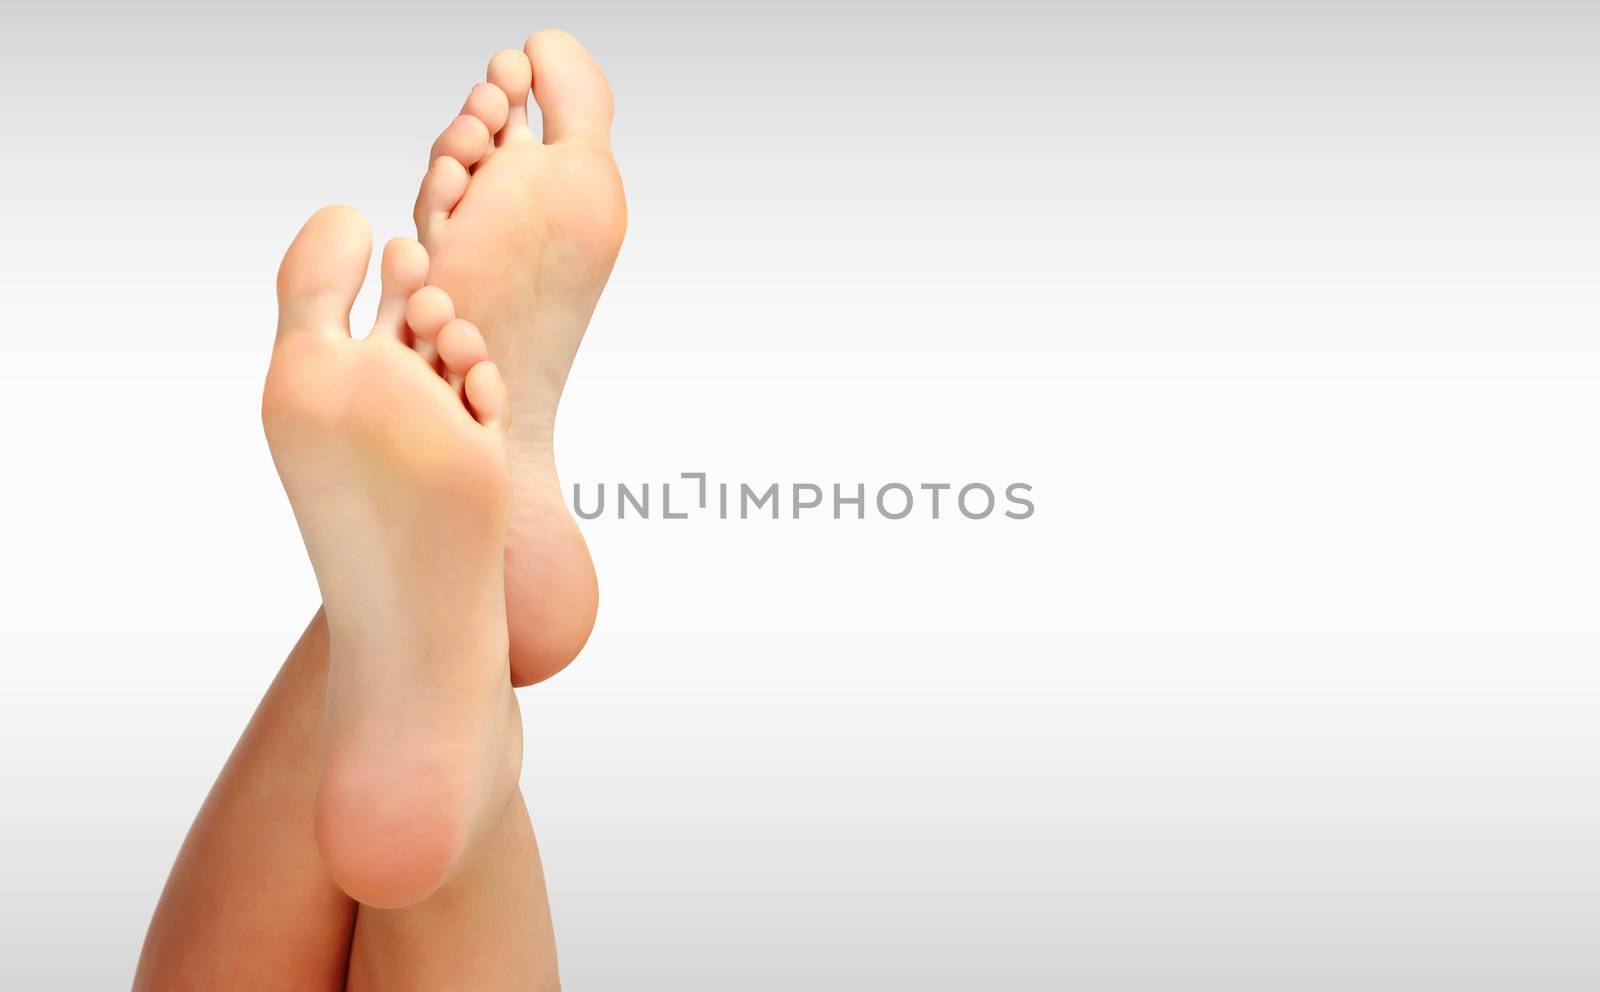 Beautiful woman's bare feet against a grey background with copyspace